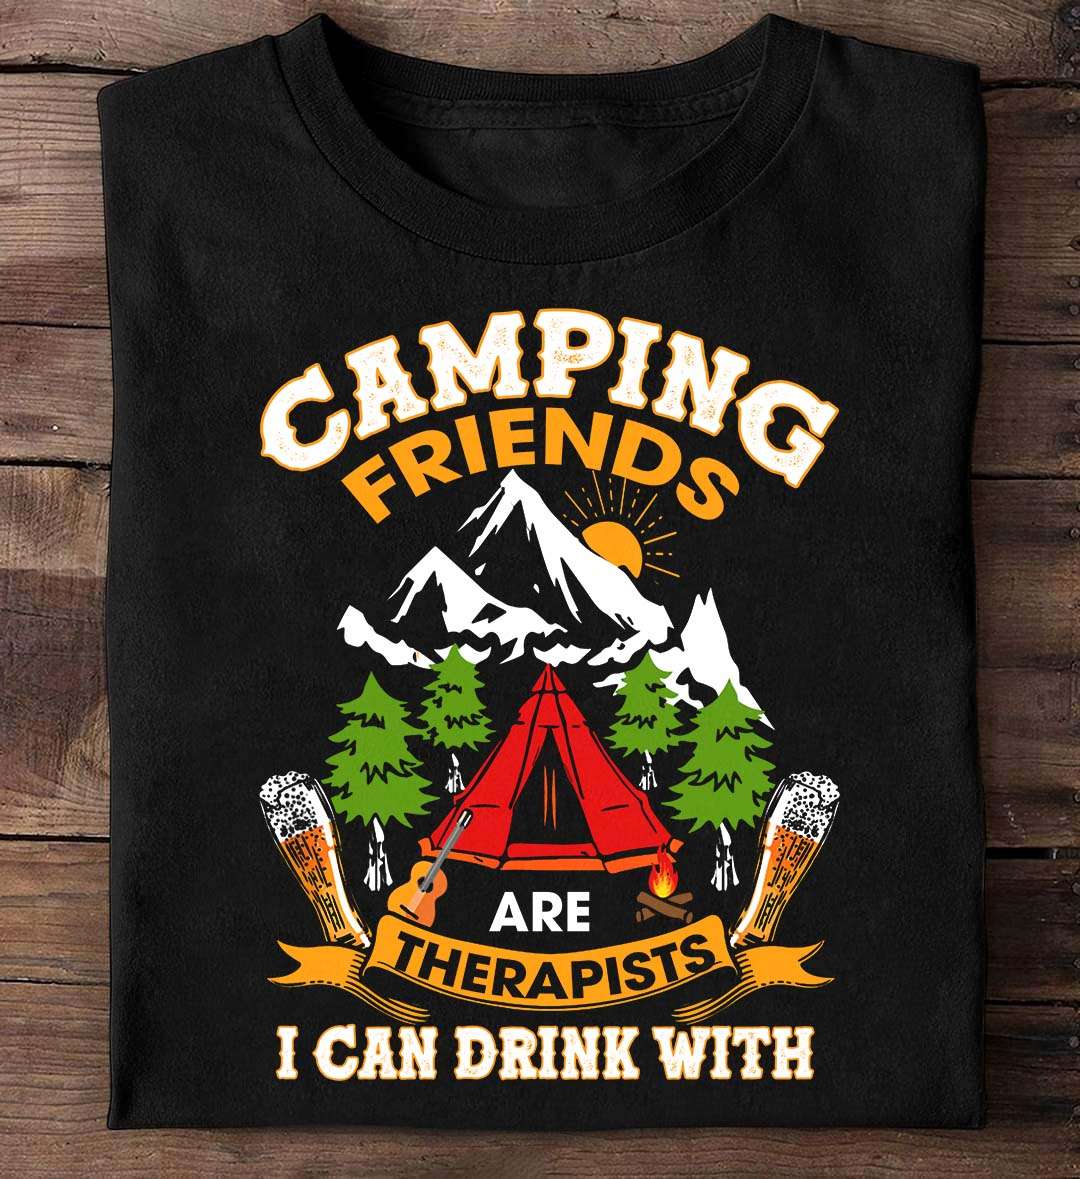 Camping friends are therapists I can drink with - Drinking and camping